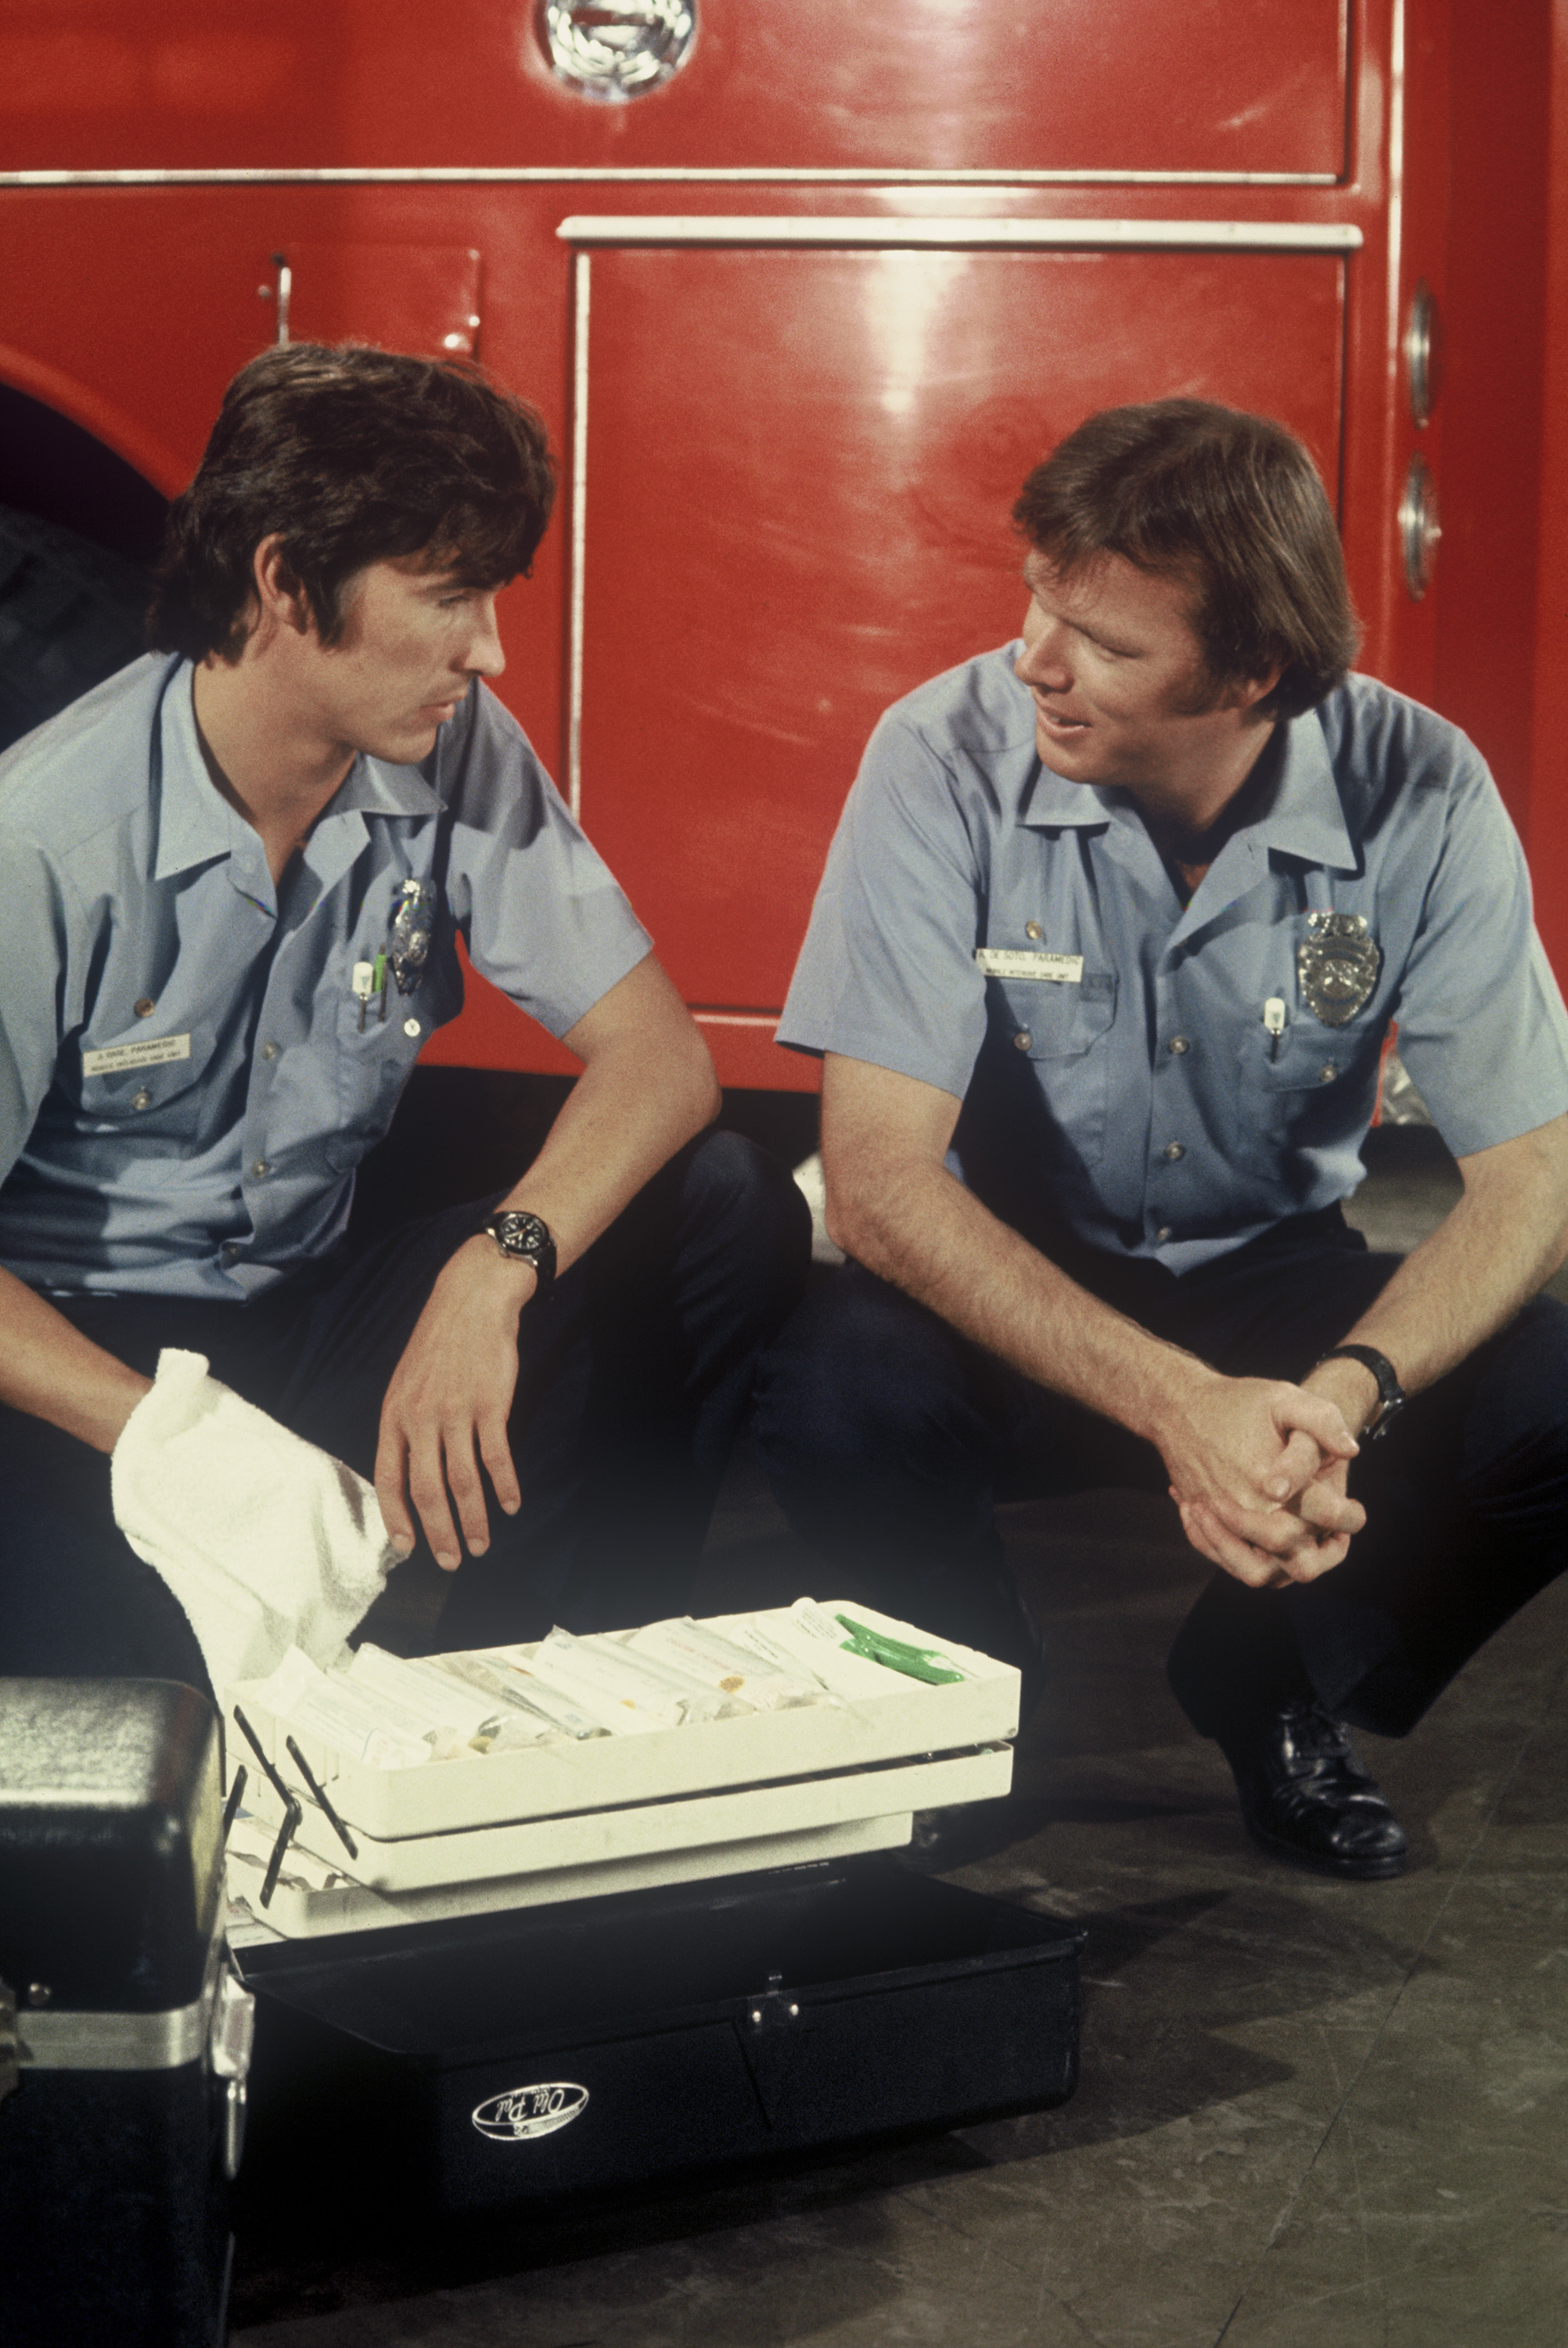 The show <i>EMERGENCY!</i> raised awareness of paramedics when the profession was just getting going. (L-R) Paramedics on the show John Gage and Roy DeSoto played by Randolph Mantooth and Kevin Tighe, respectively, in an episode that aired Nov. 3, 1973. (NBCU Photo Bank/NBCUniversal —Getty Images)